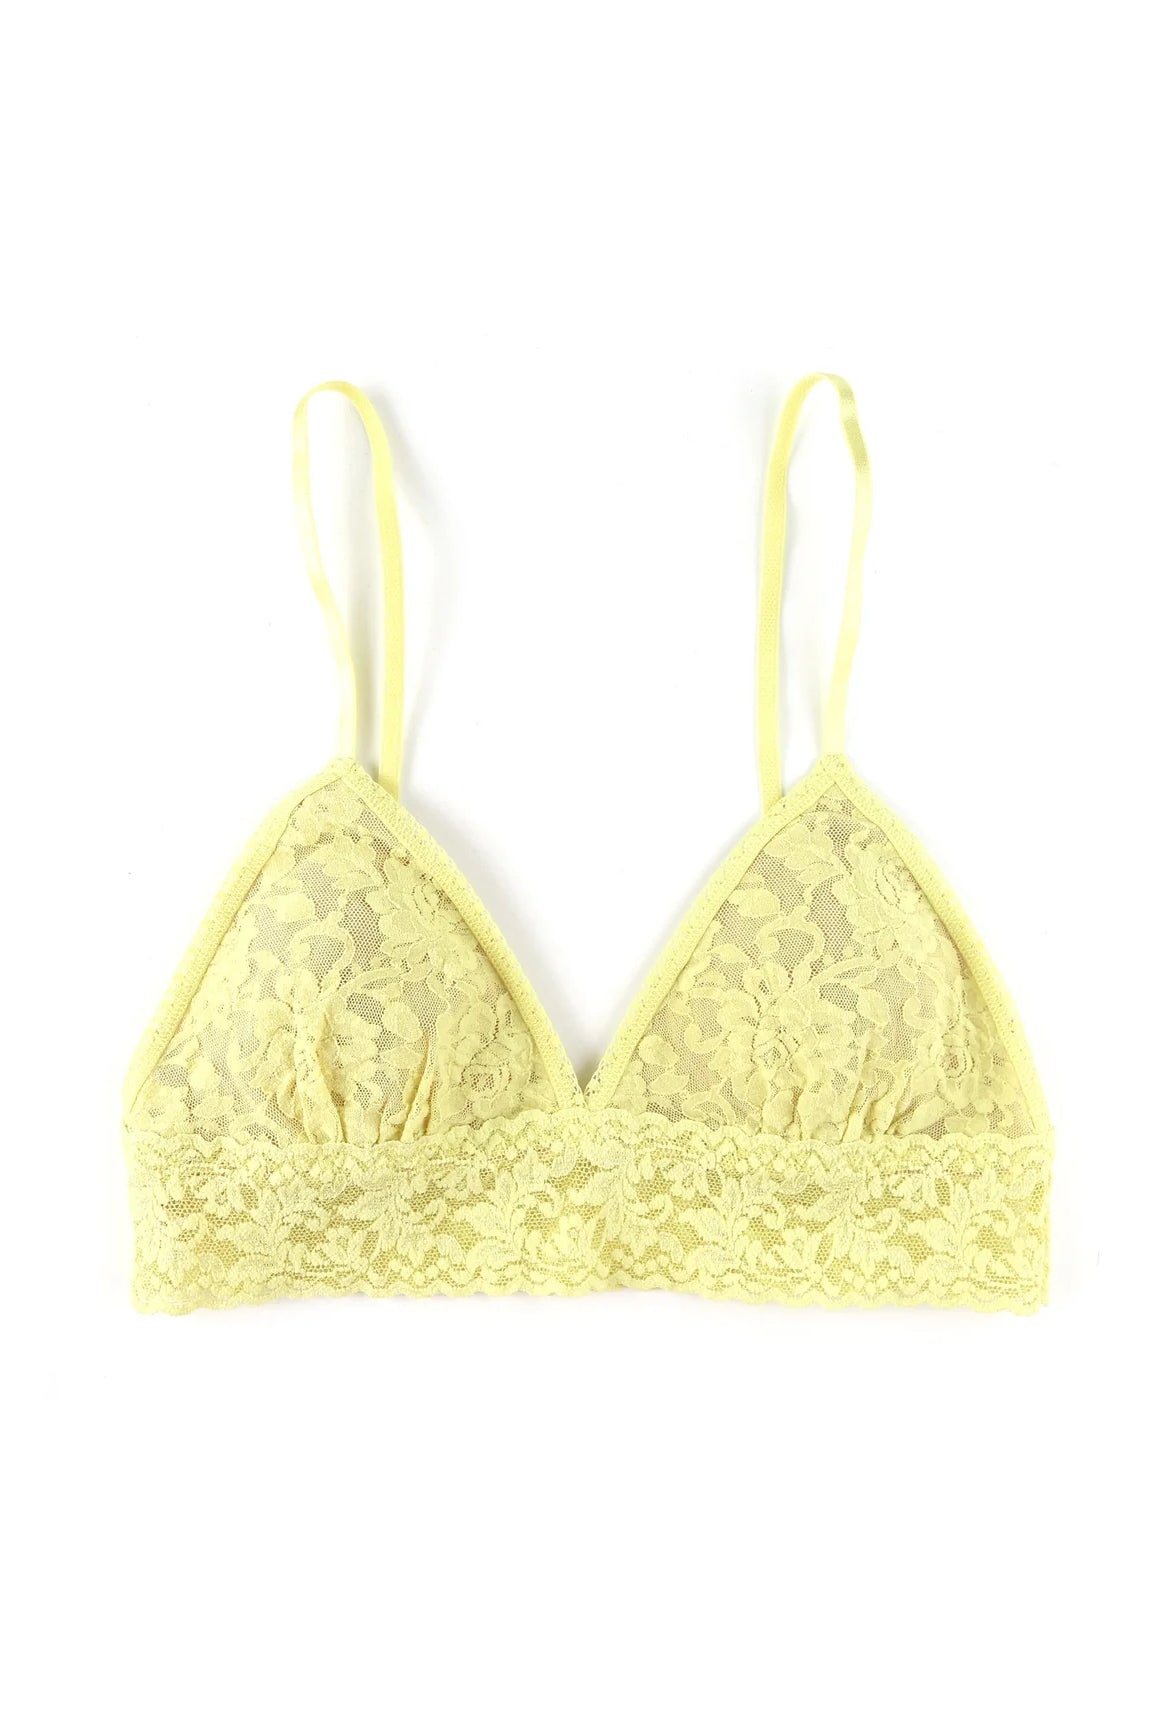 Signature Lace Padded Triangle Bralette - Smile More - Flirt! Luxe Lingerie & Sleepwear